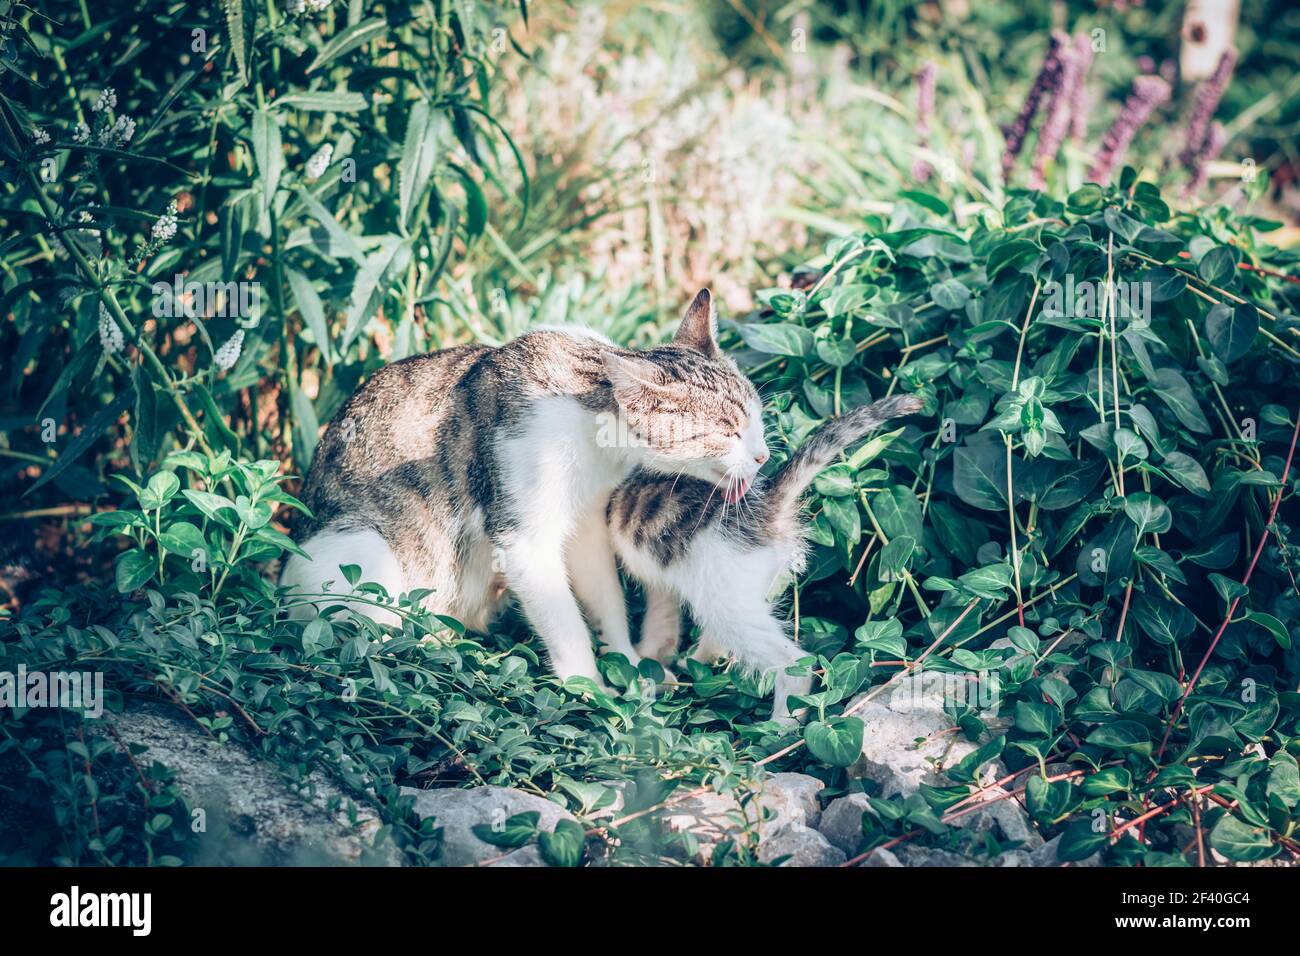 cat mother and baby child hugging and licking together among green plants in sunny day feeling happy Stock Photo